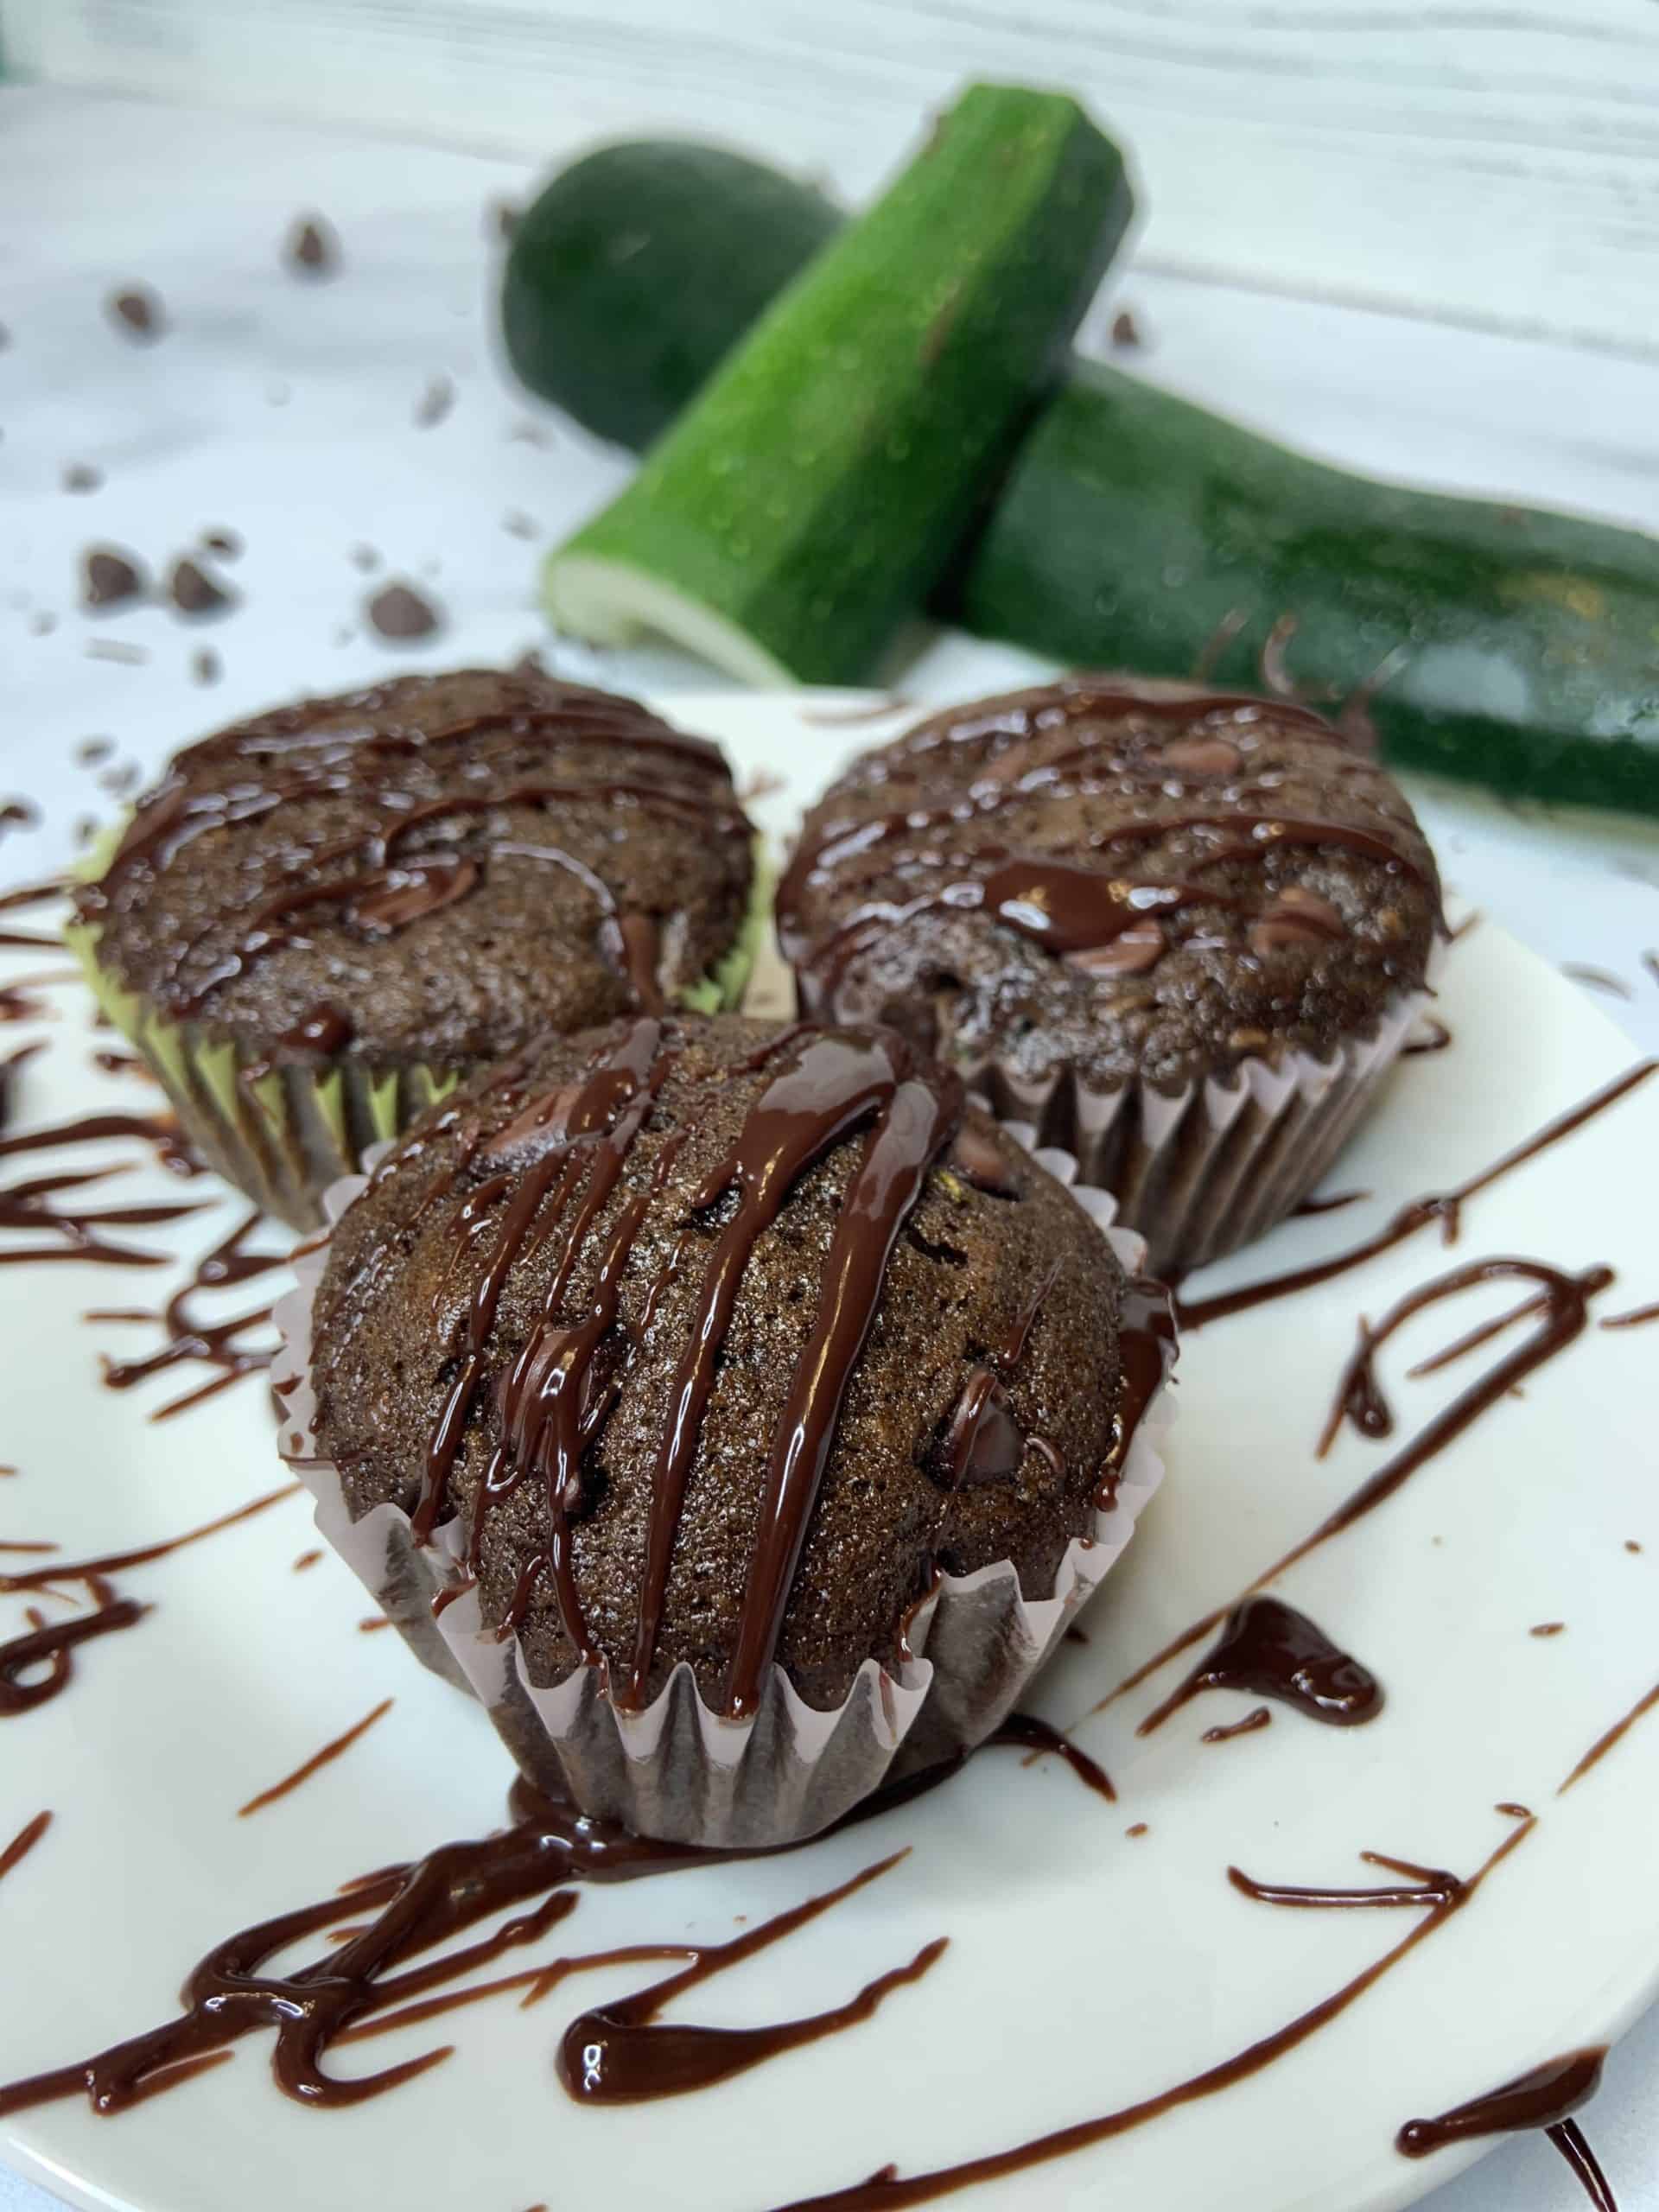 3 Gluten Free Chocolate Zucchini Muffins on a plate drizzled with ganache